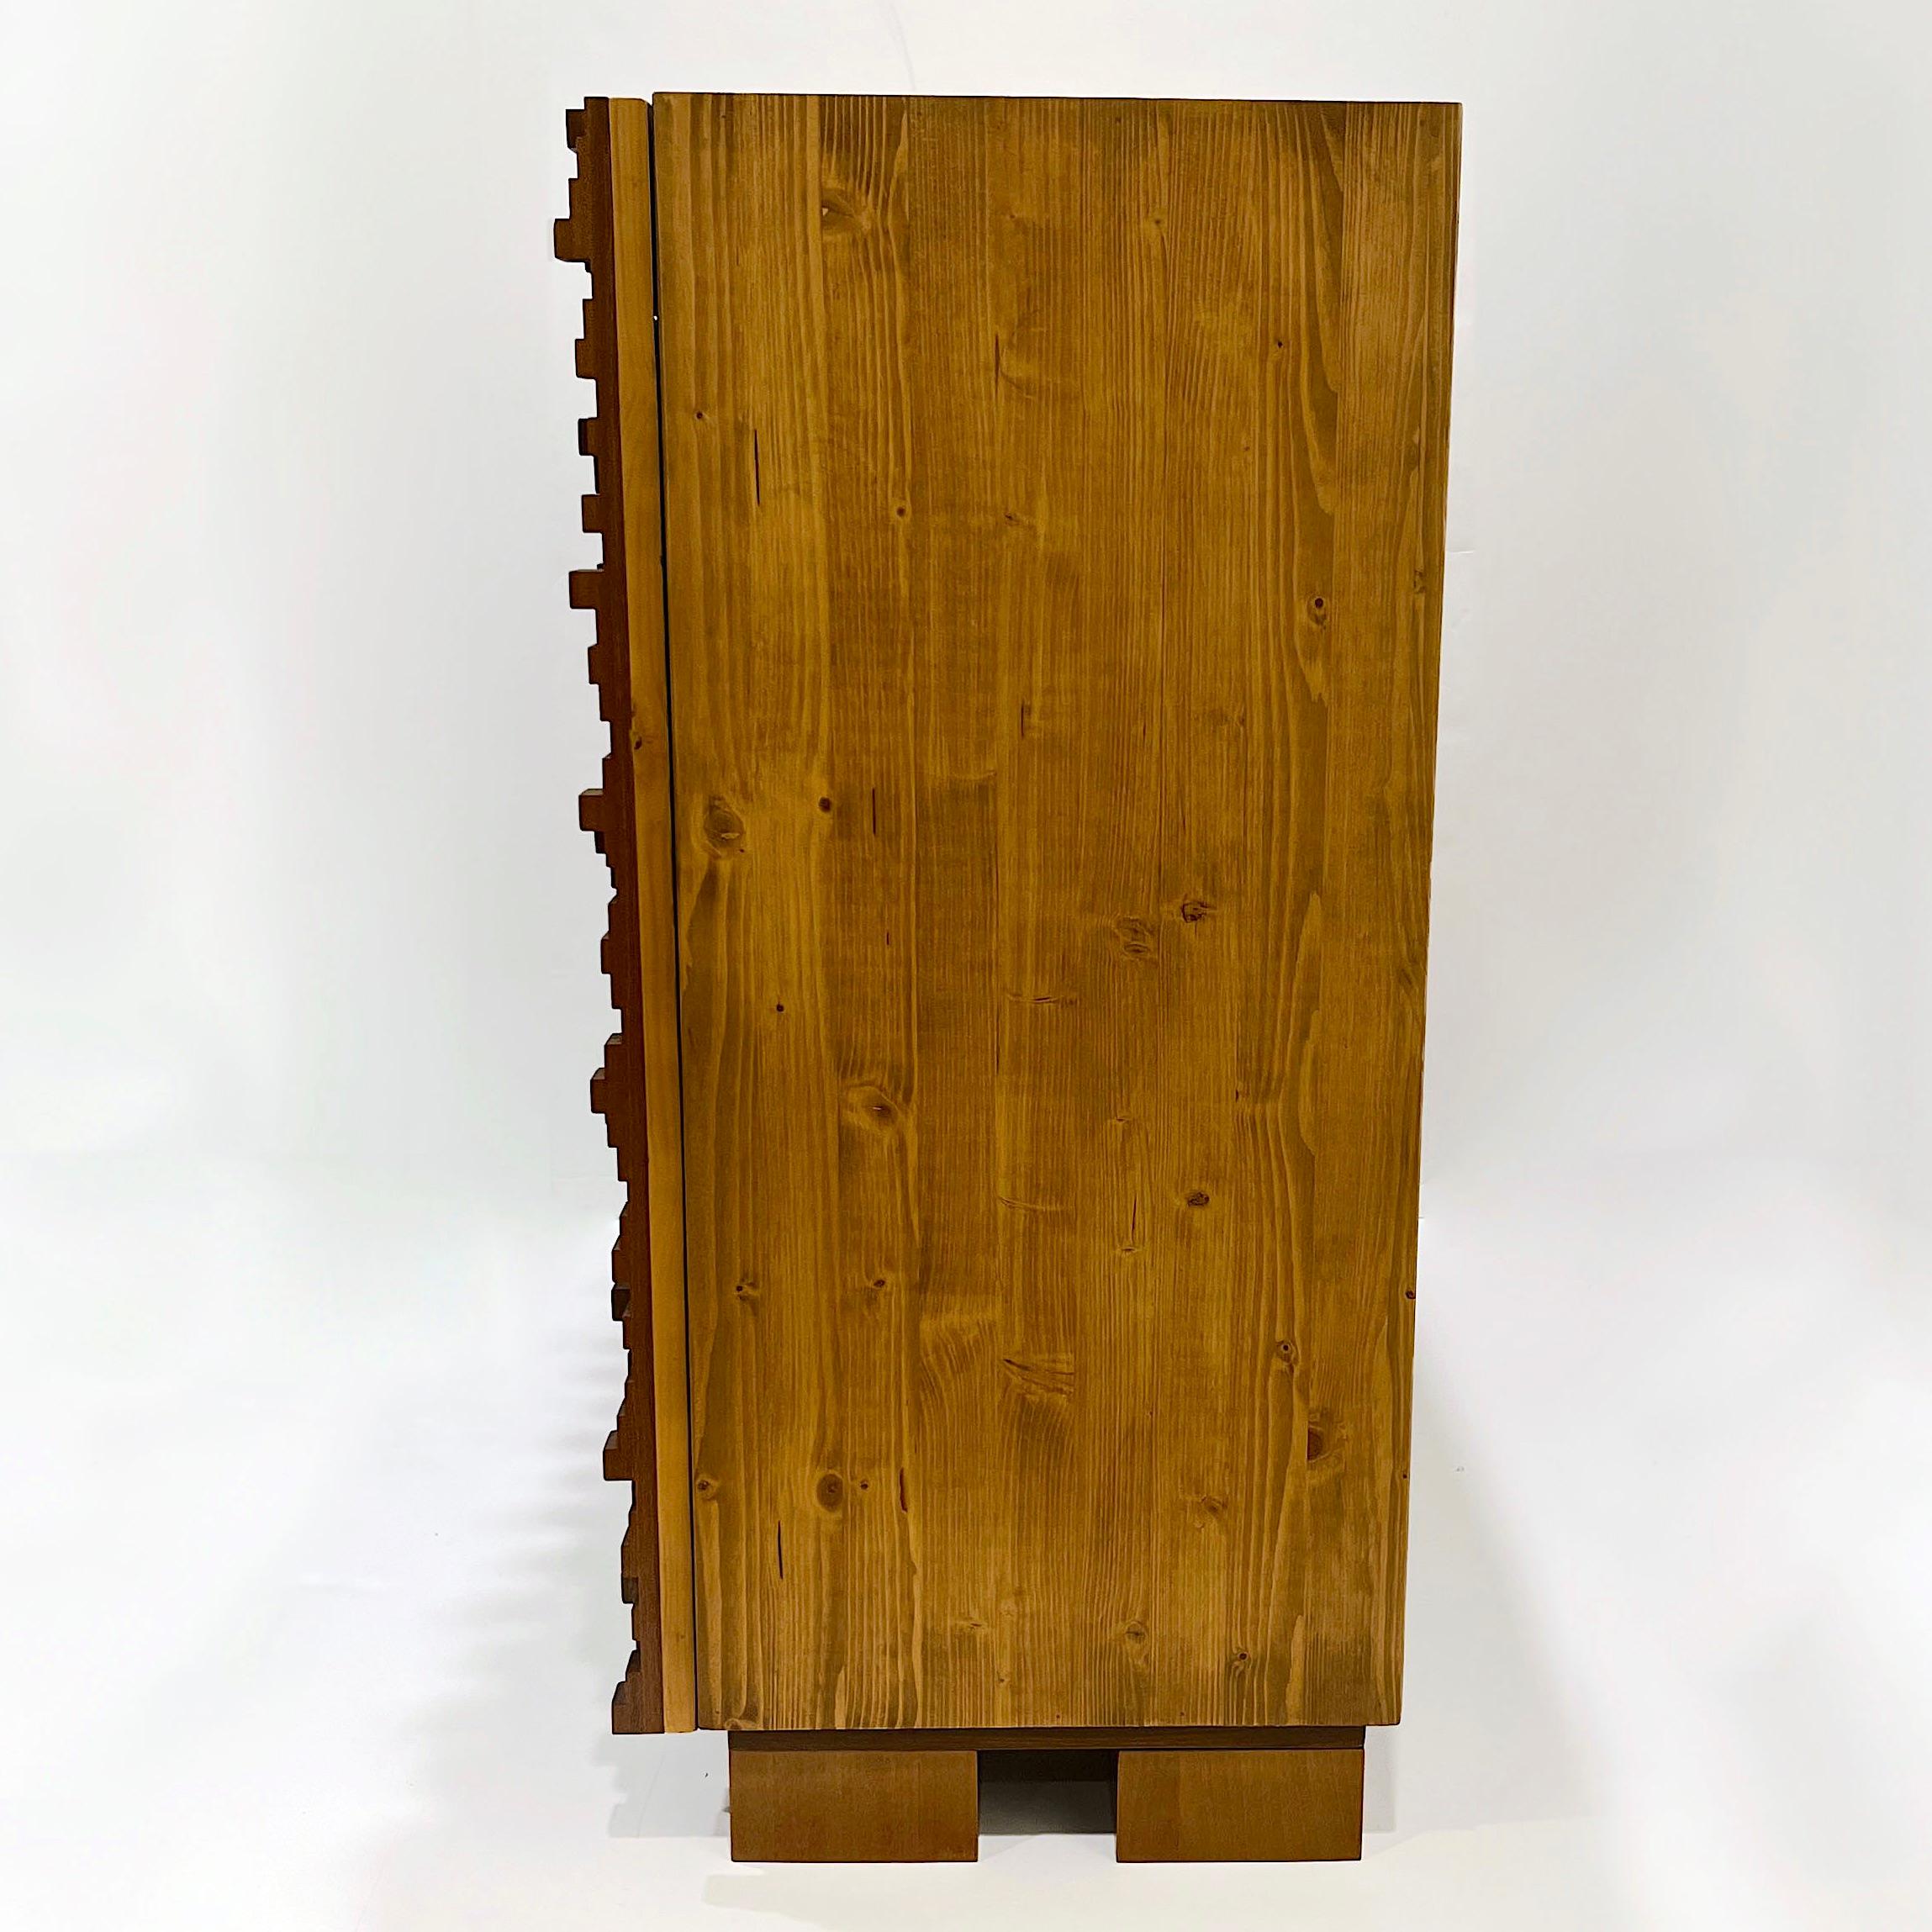 Contemporary Italian 2-Door Modern Cabinet/Sideboard in Solid Carved Beech Wood Neuf - En vente à New York, NY